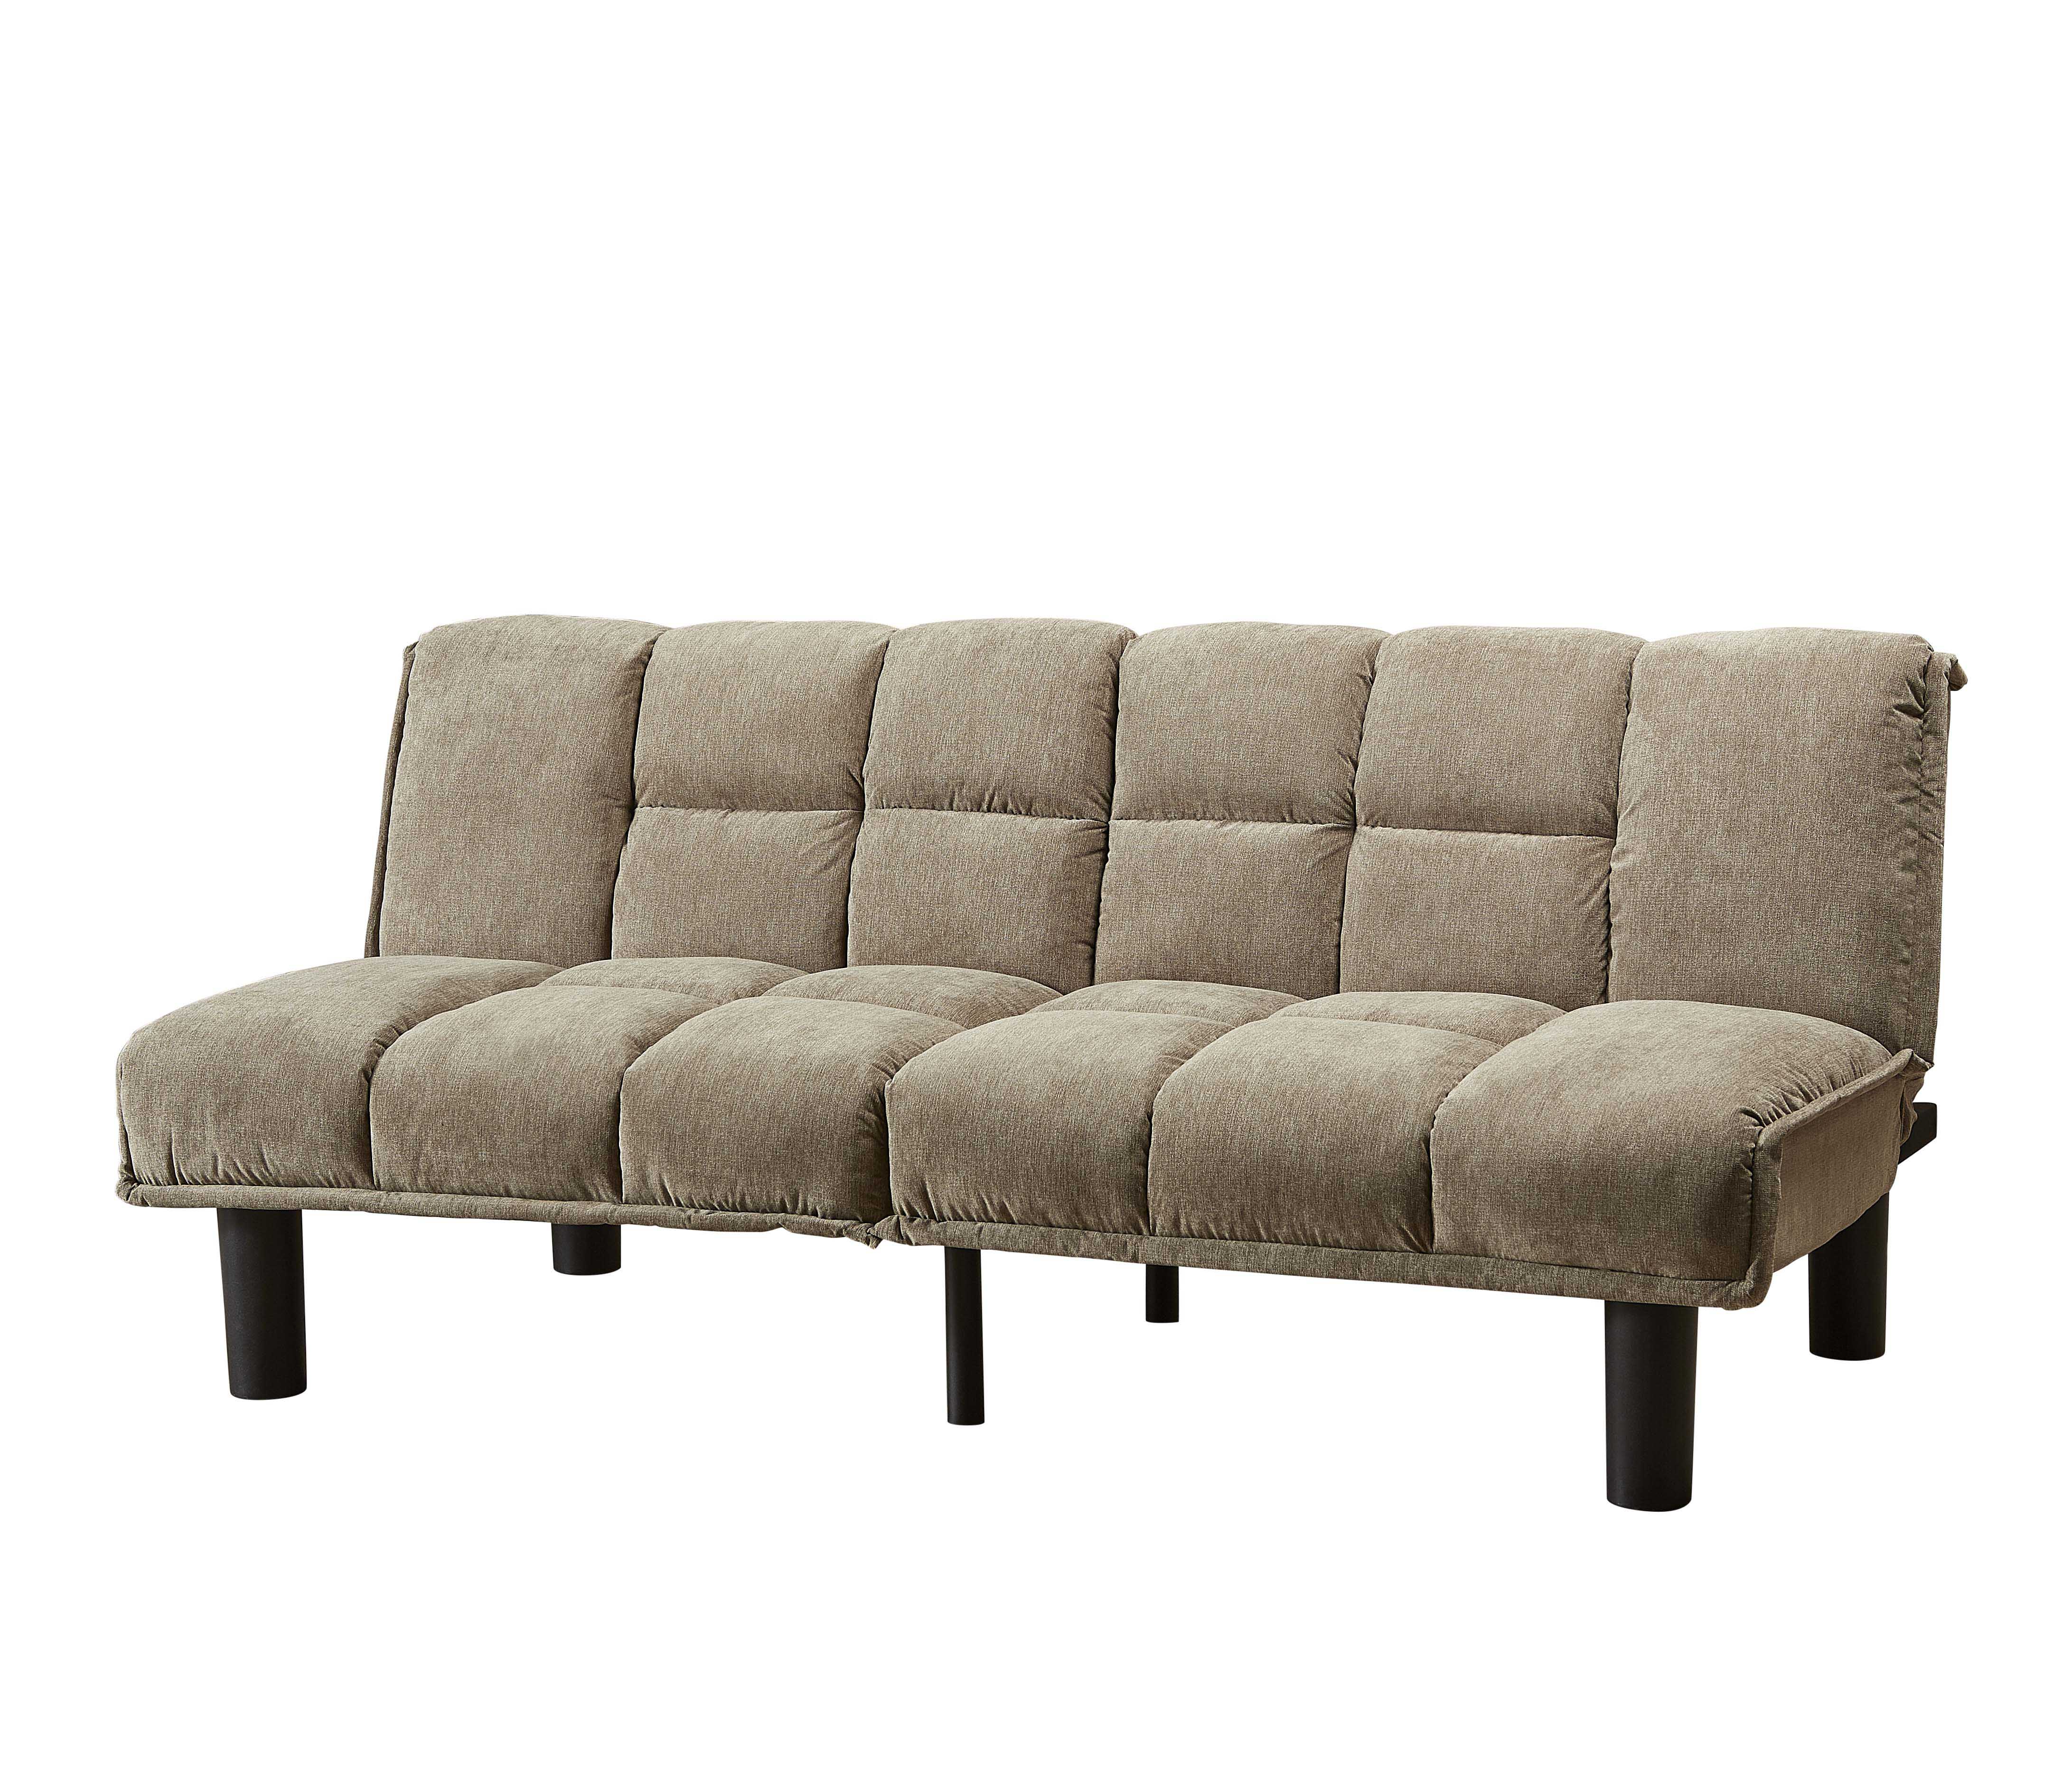 Mainstays Tufted Microfiber Futon, Tan Faux Suede - image 1 of 5